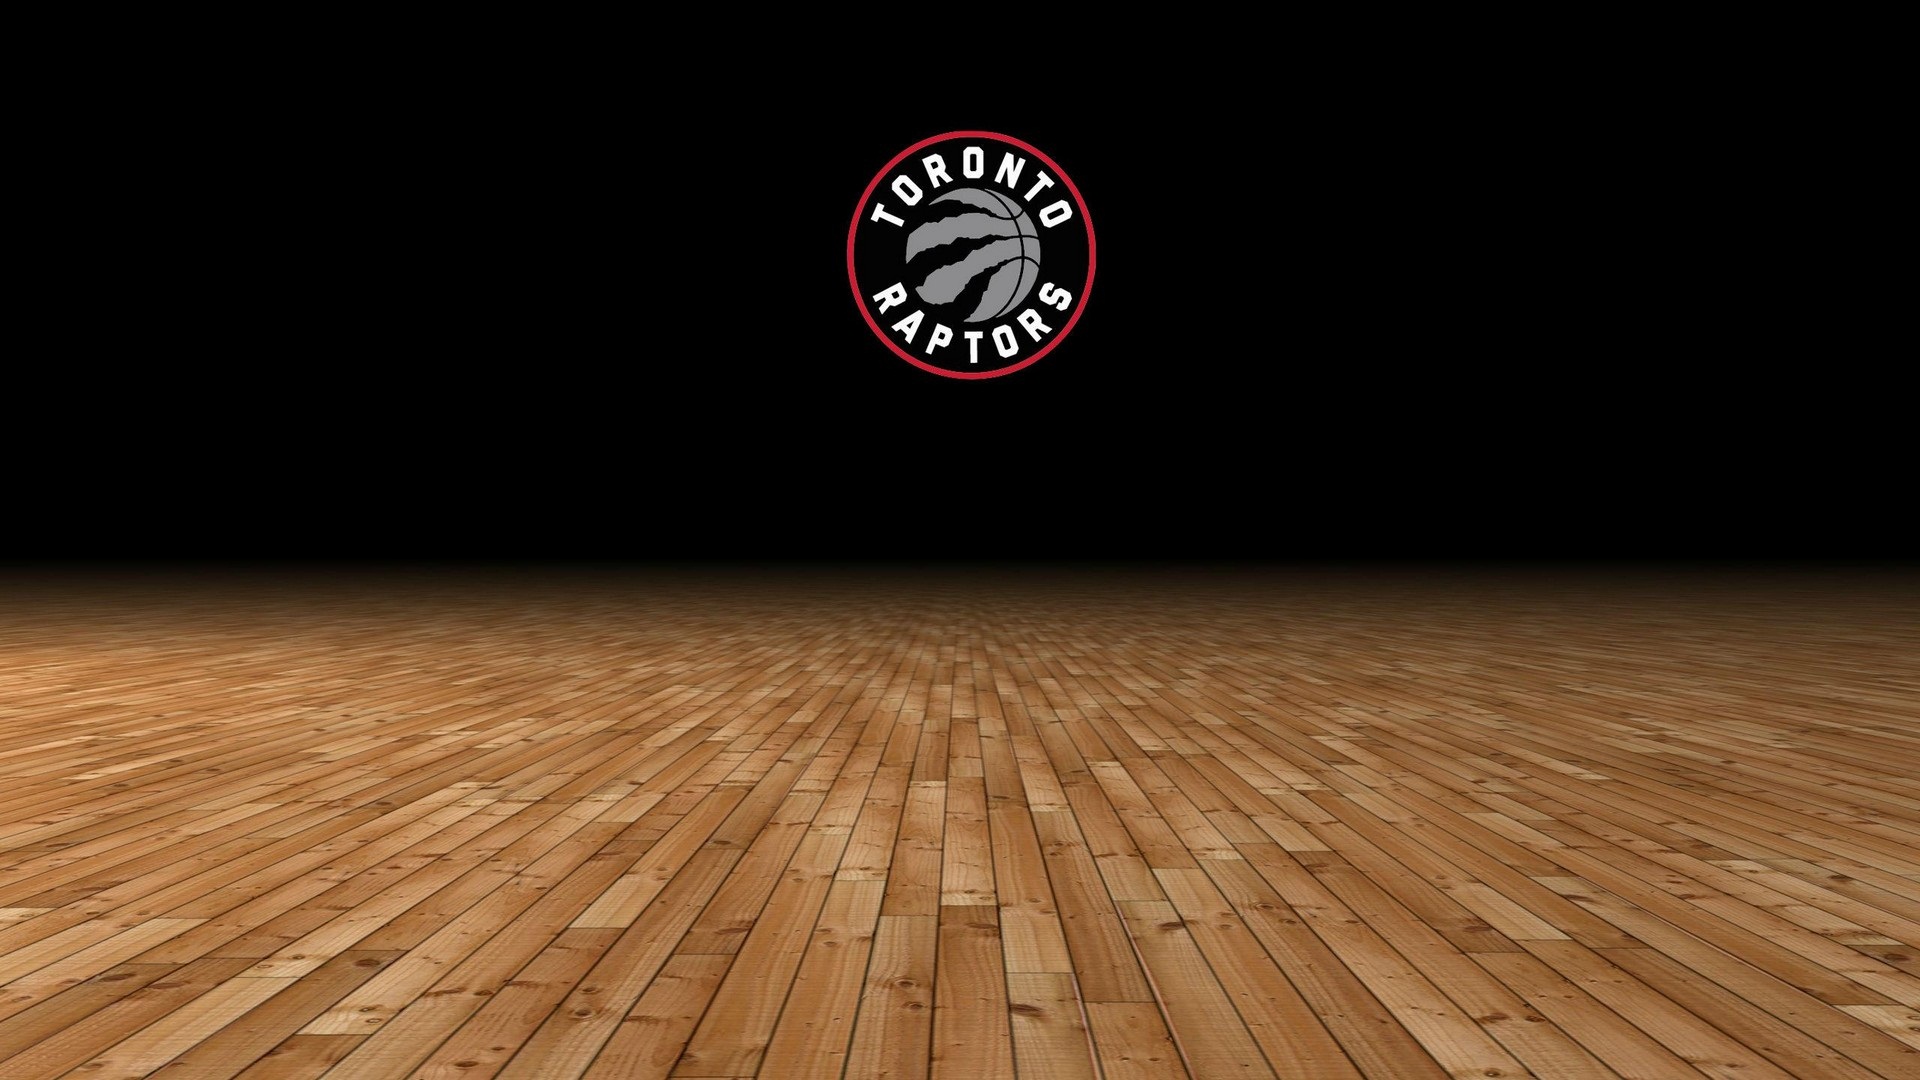 Toronto Raptors Wallpaper with image dimensions 1920x1080 pixel. You can make this wallpaper for your Desktop Computer Backgrounds, Windows or Mac Screensavers, iPhone Lock screen, Tablet or Android and another Mobile Phone device